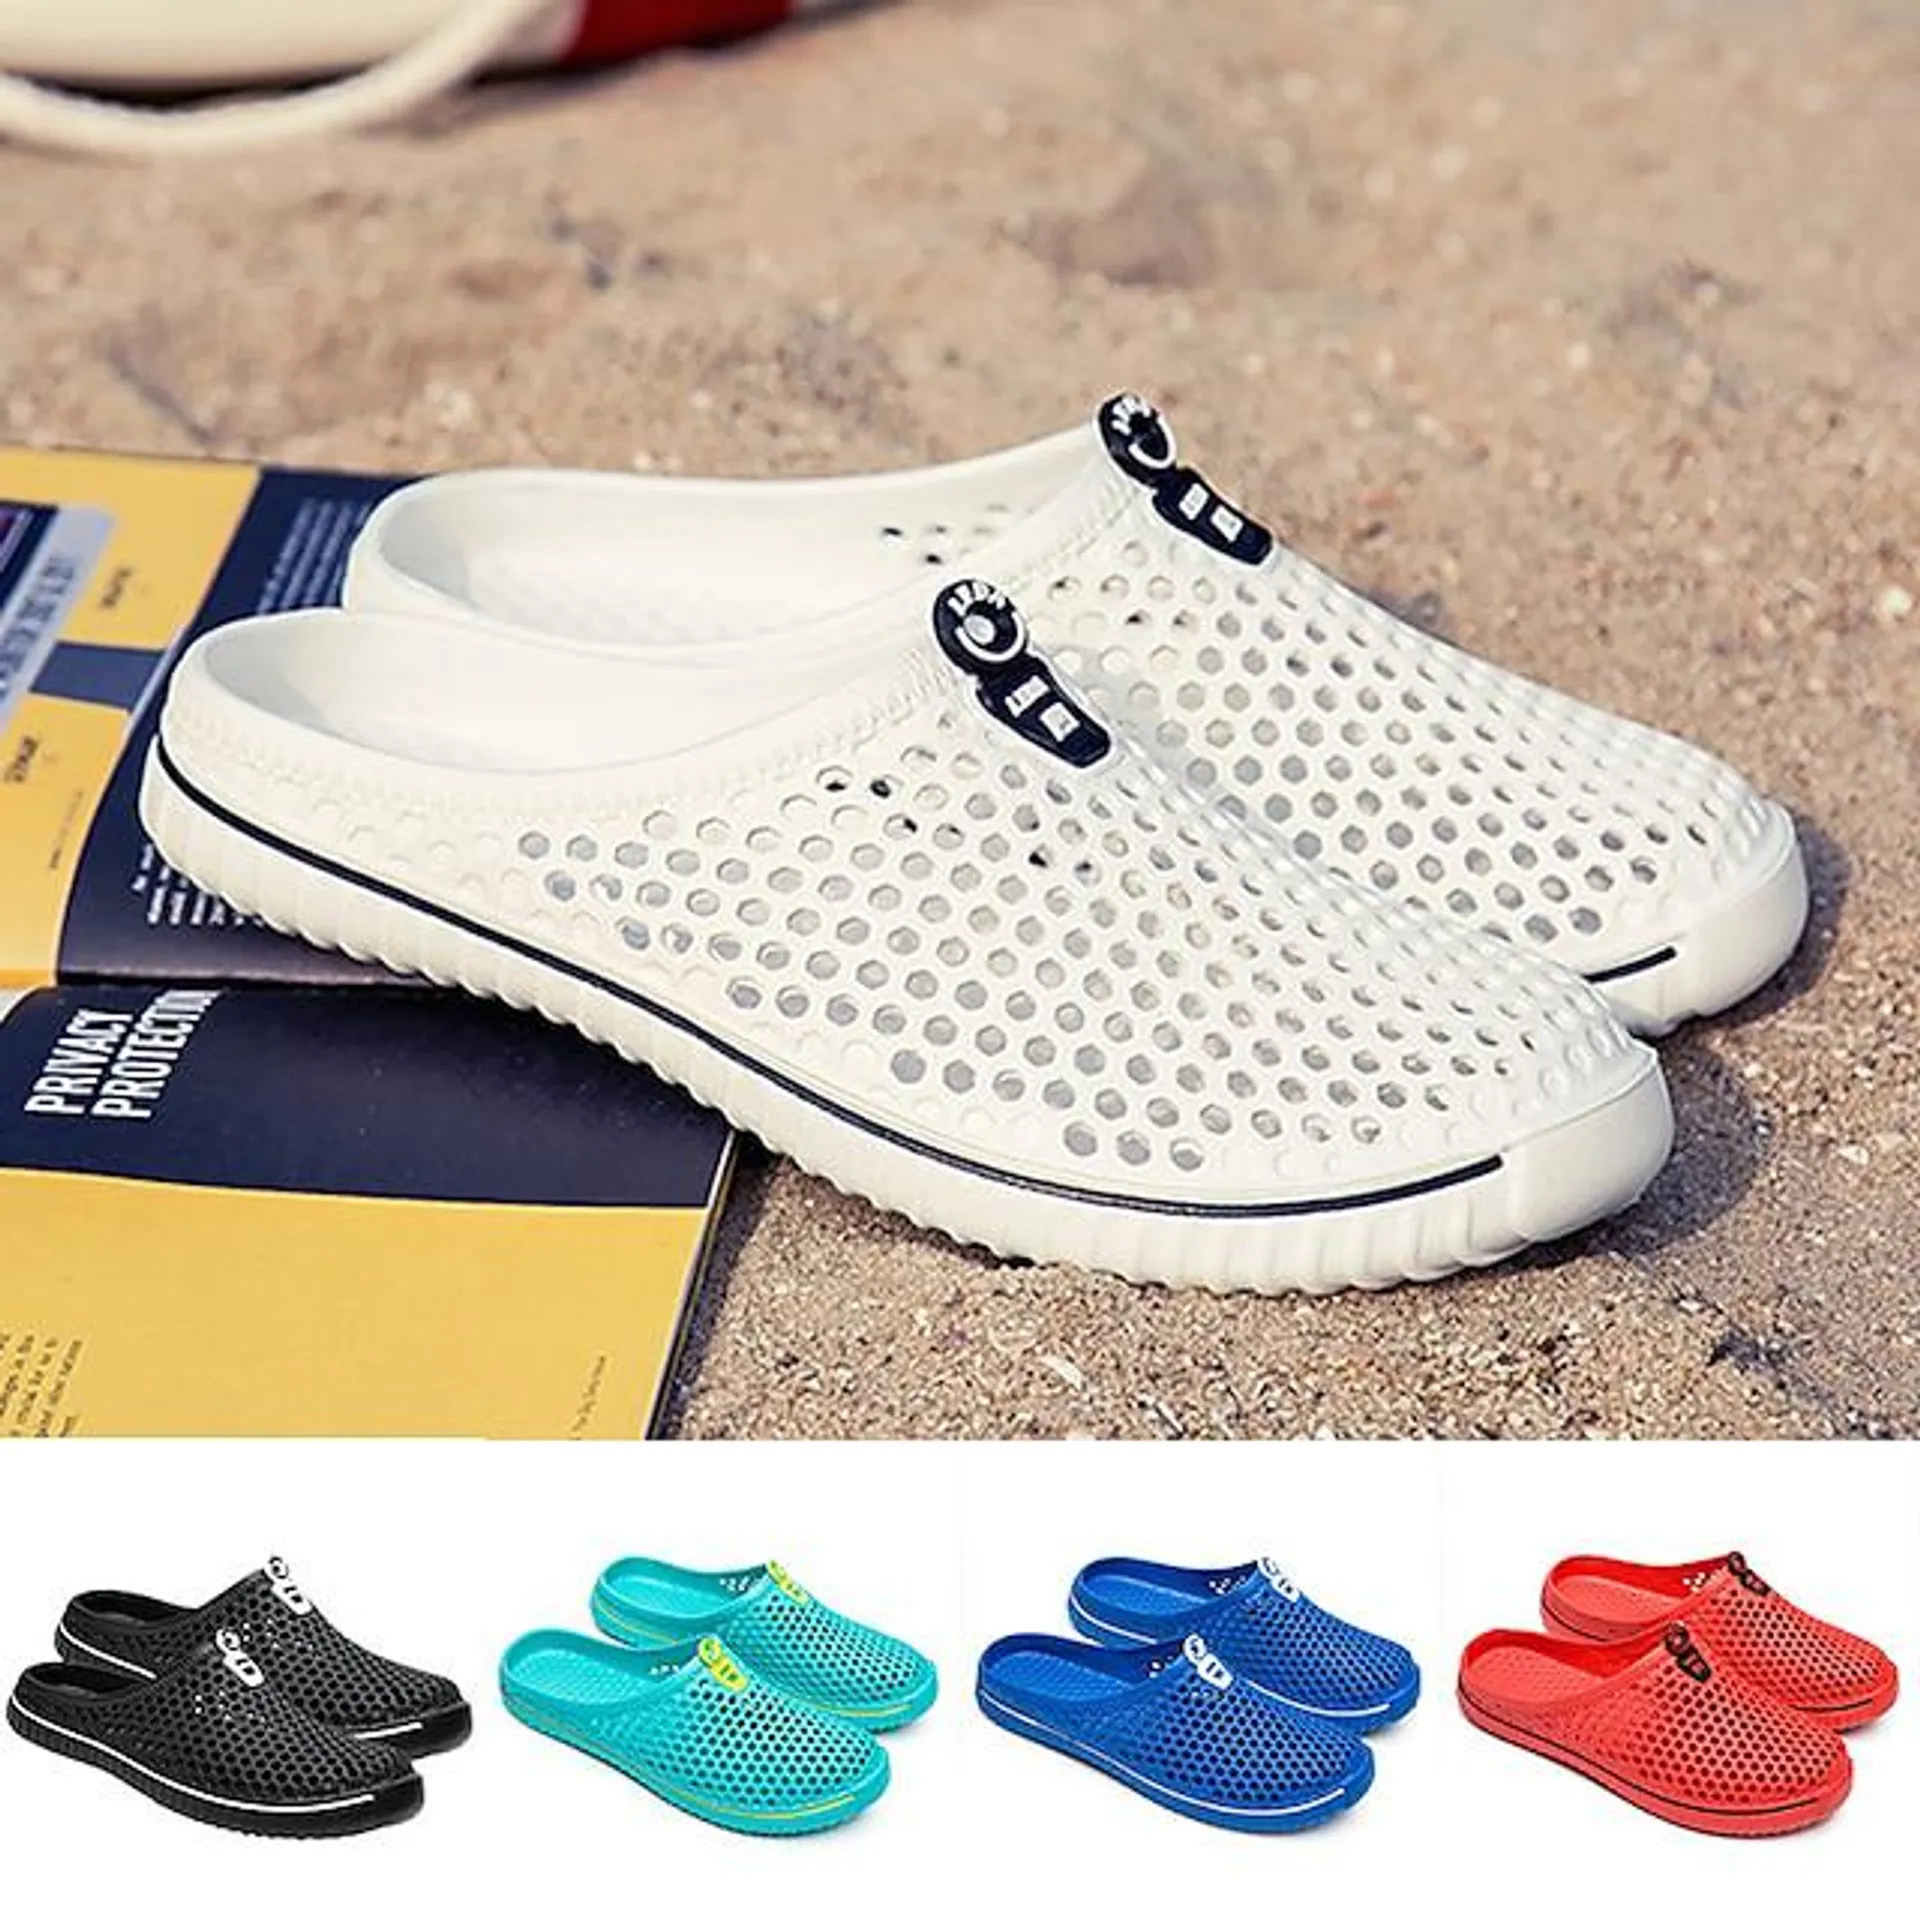 Men's Women's Water Shoes Anti-Slip Breathable Lightweight Quick Dry Durable Swim Shoes for Outdoor Exercise Beach Walking